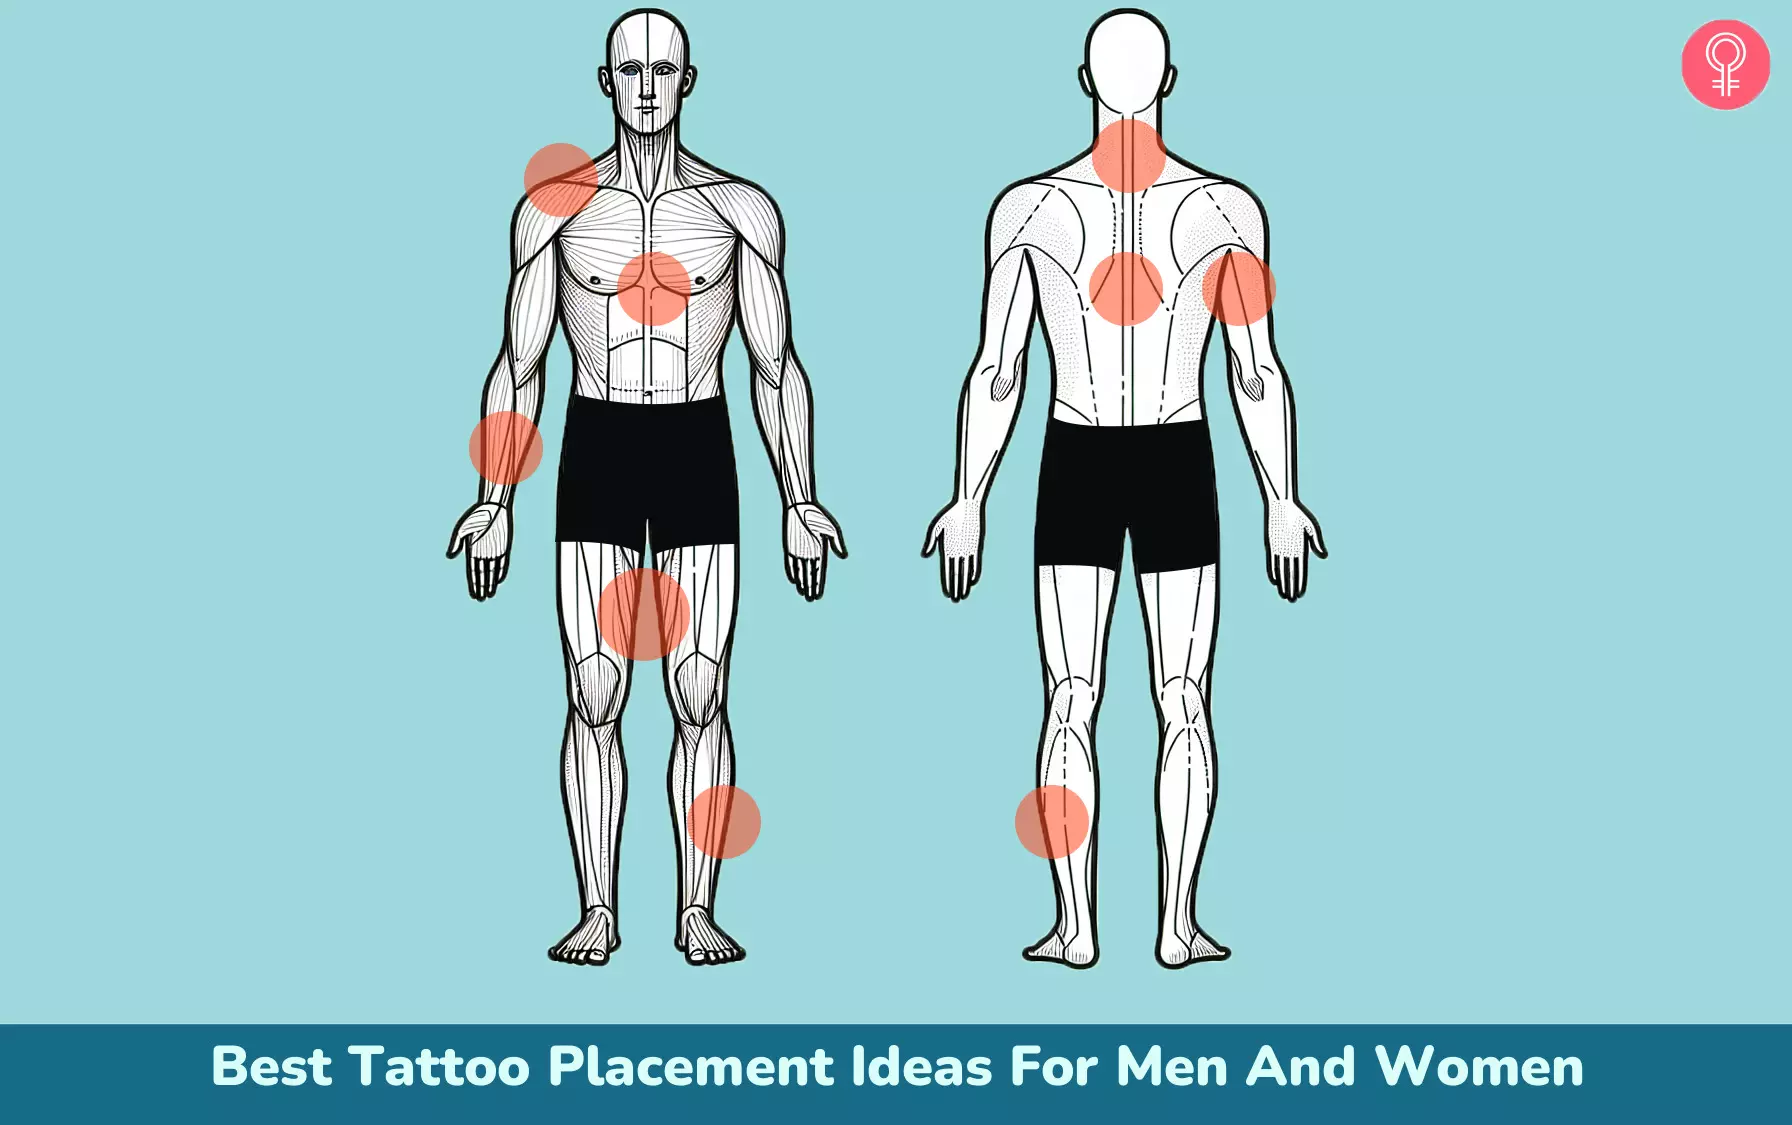 Best Tattoo Placement Ideas For Men And Women